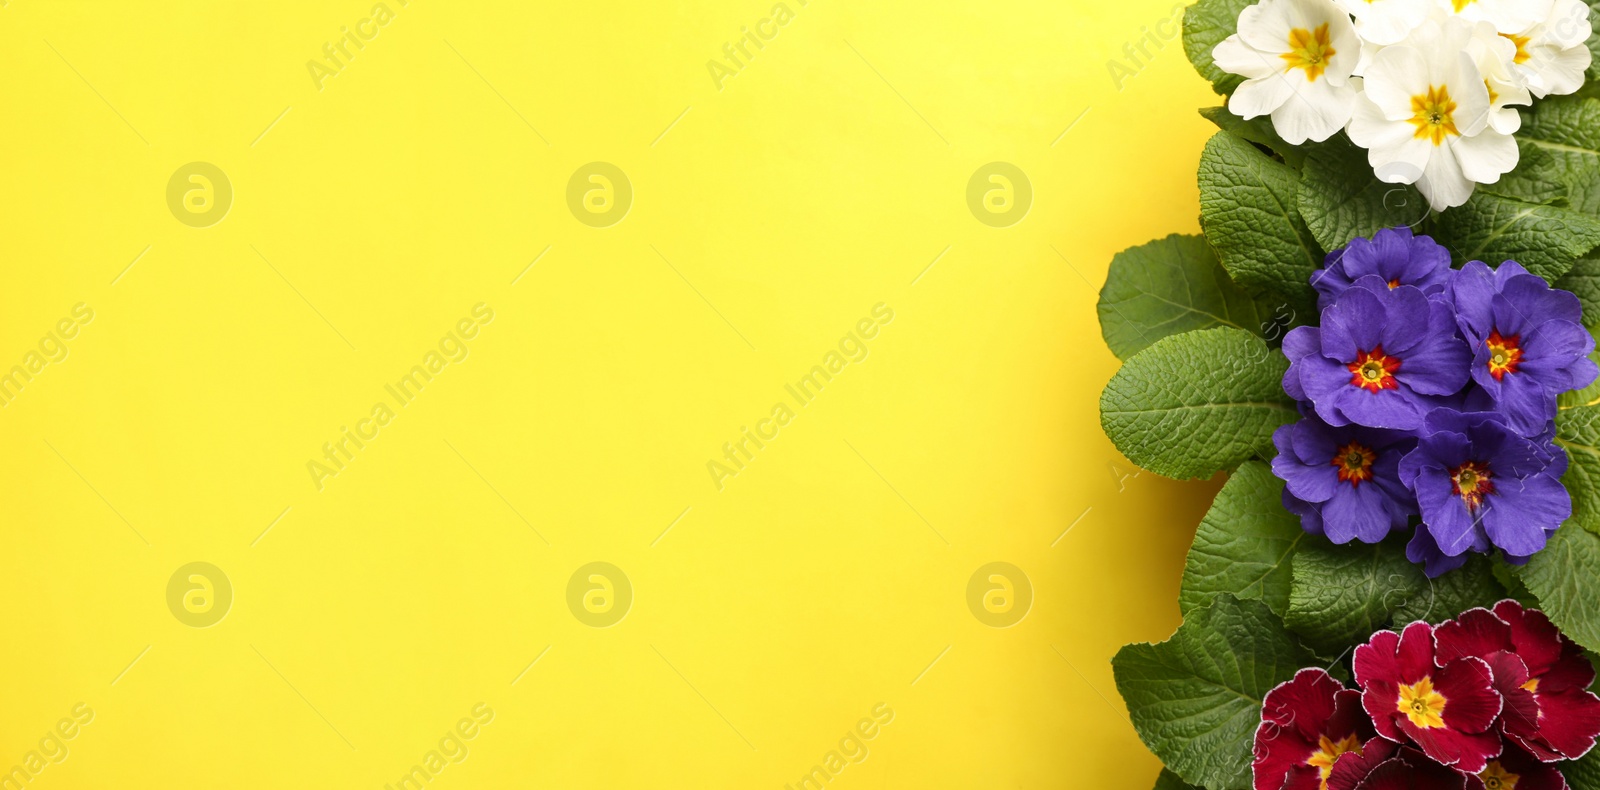 Photo of Beautiful primula (primrose) plants with colorful flowers on yellow background, flat lay and space for text. Spring blossom